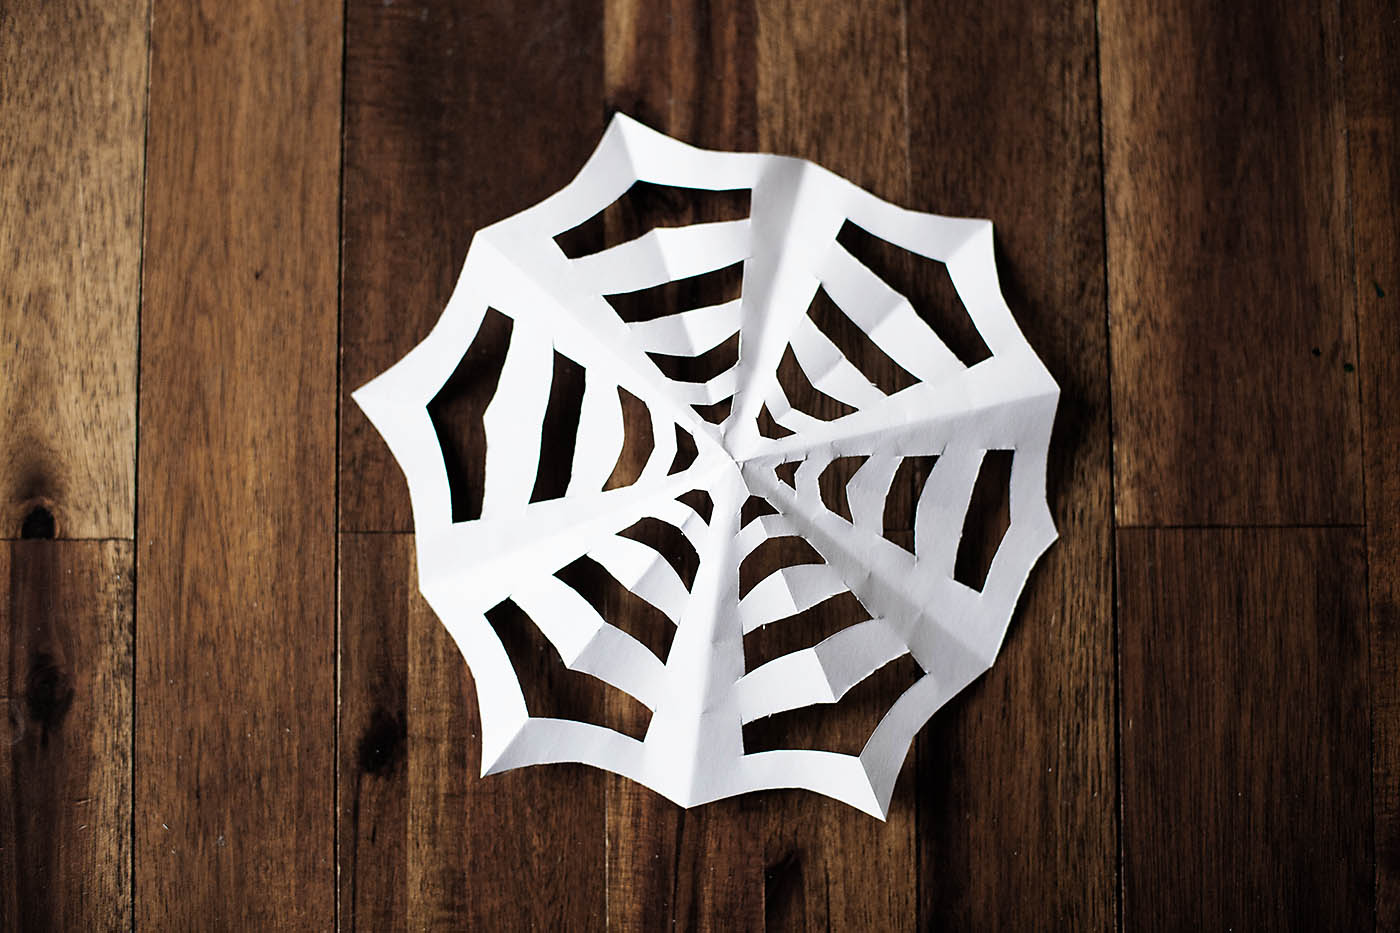 Paper spiderweb - like snowflakes, but for Halloween!